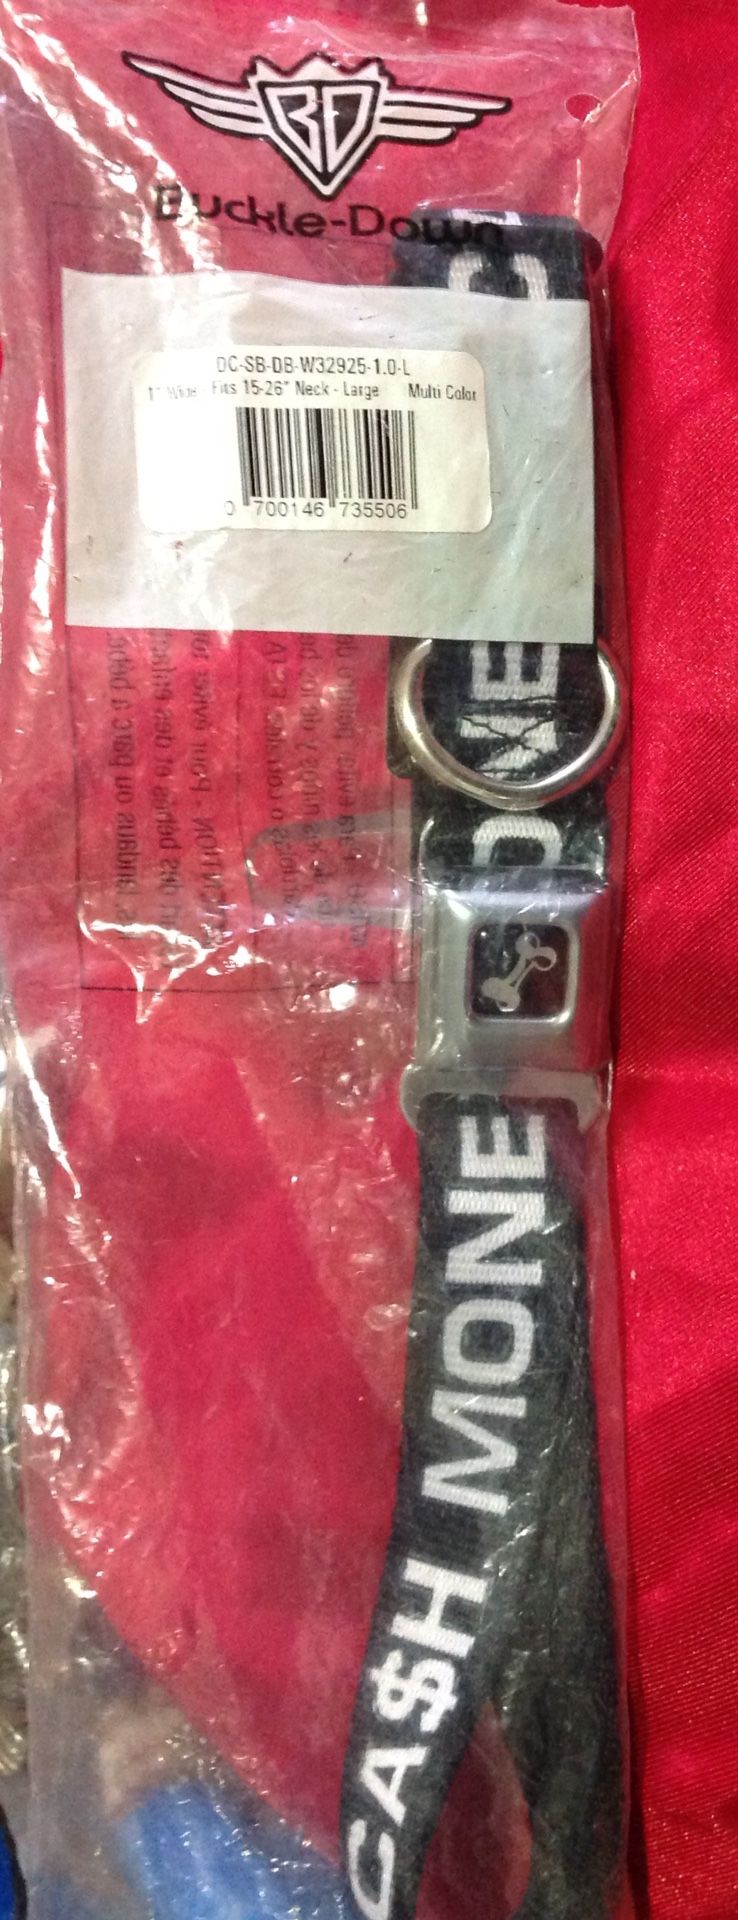 BUCKEL-DOWN DOG COLLAR FIT 15-26" (CA$H MONEY) LARGE. NEW IN Original Package